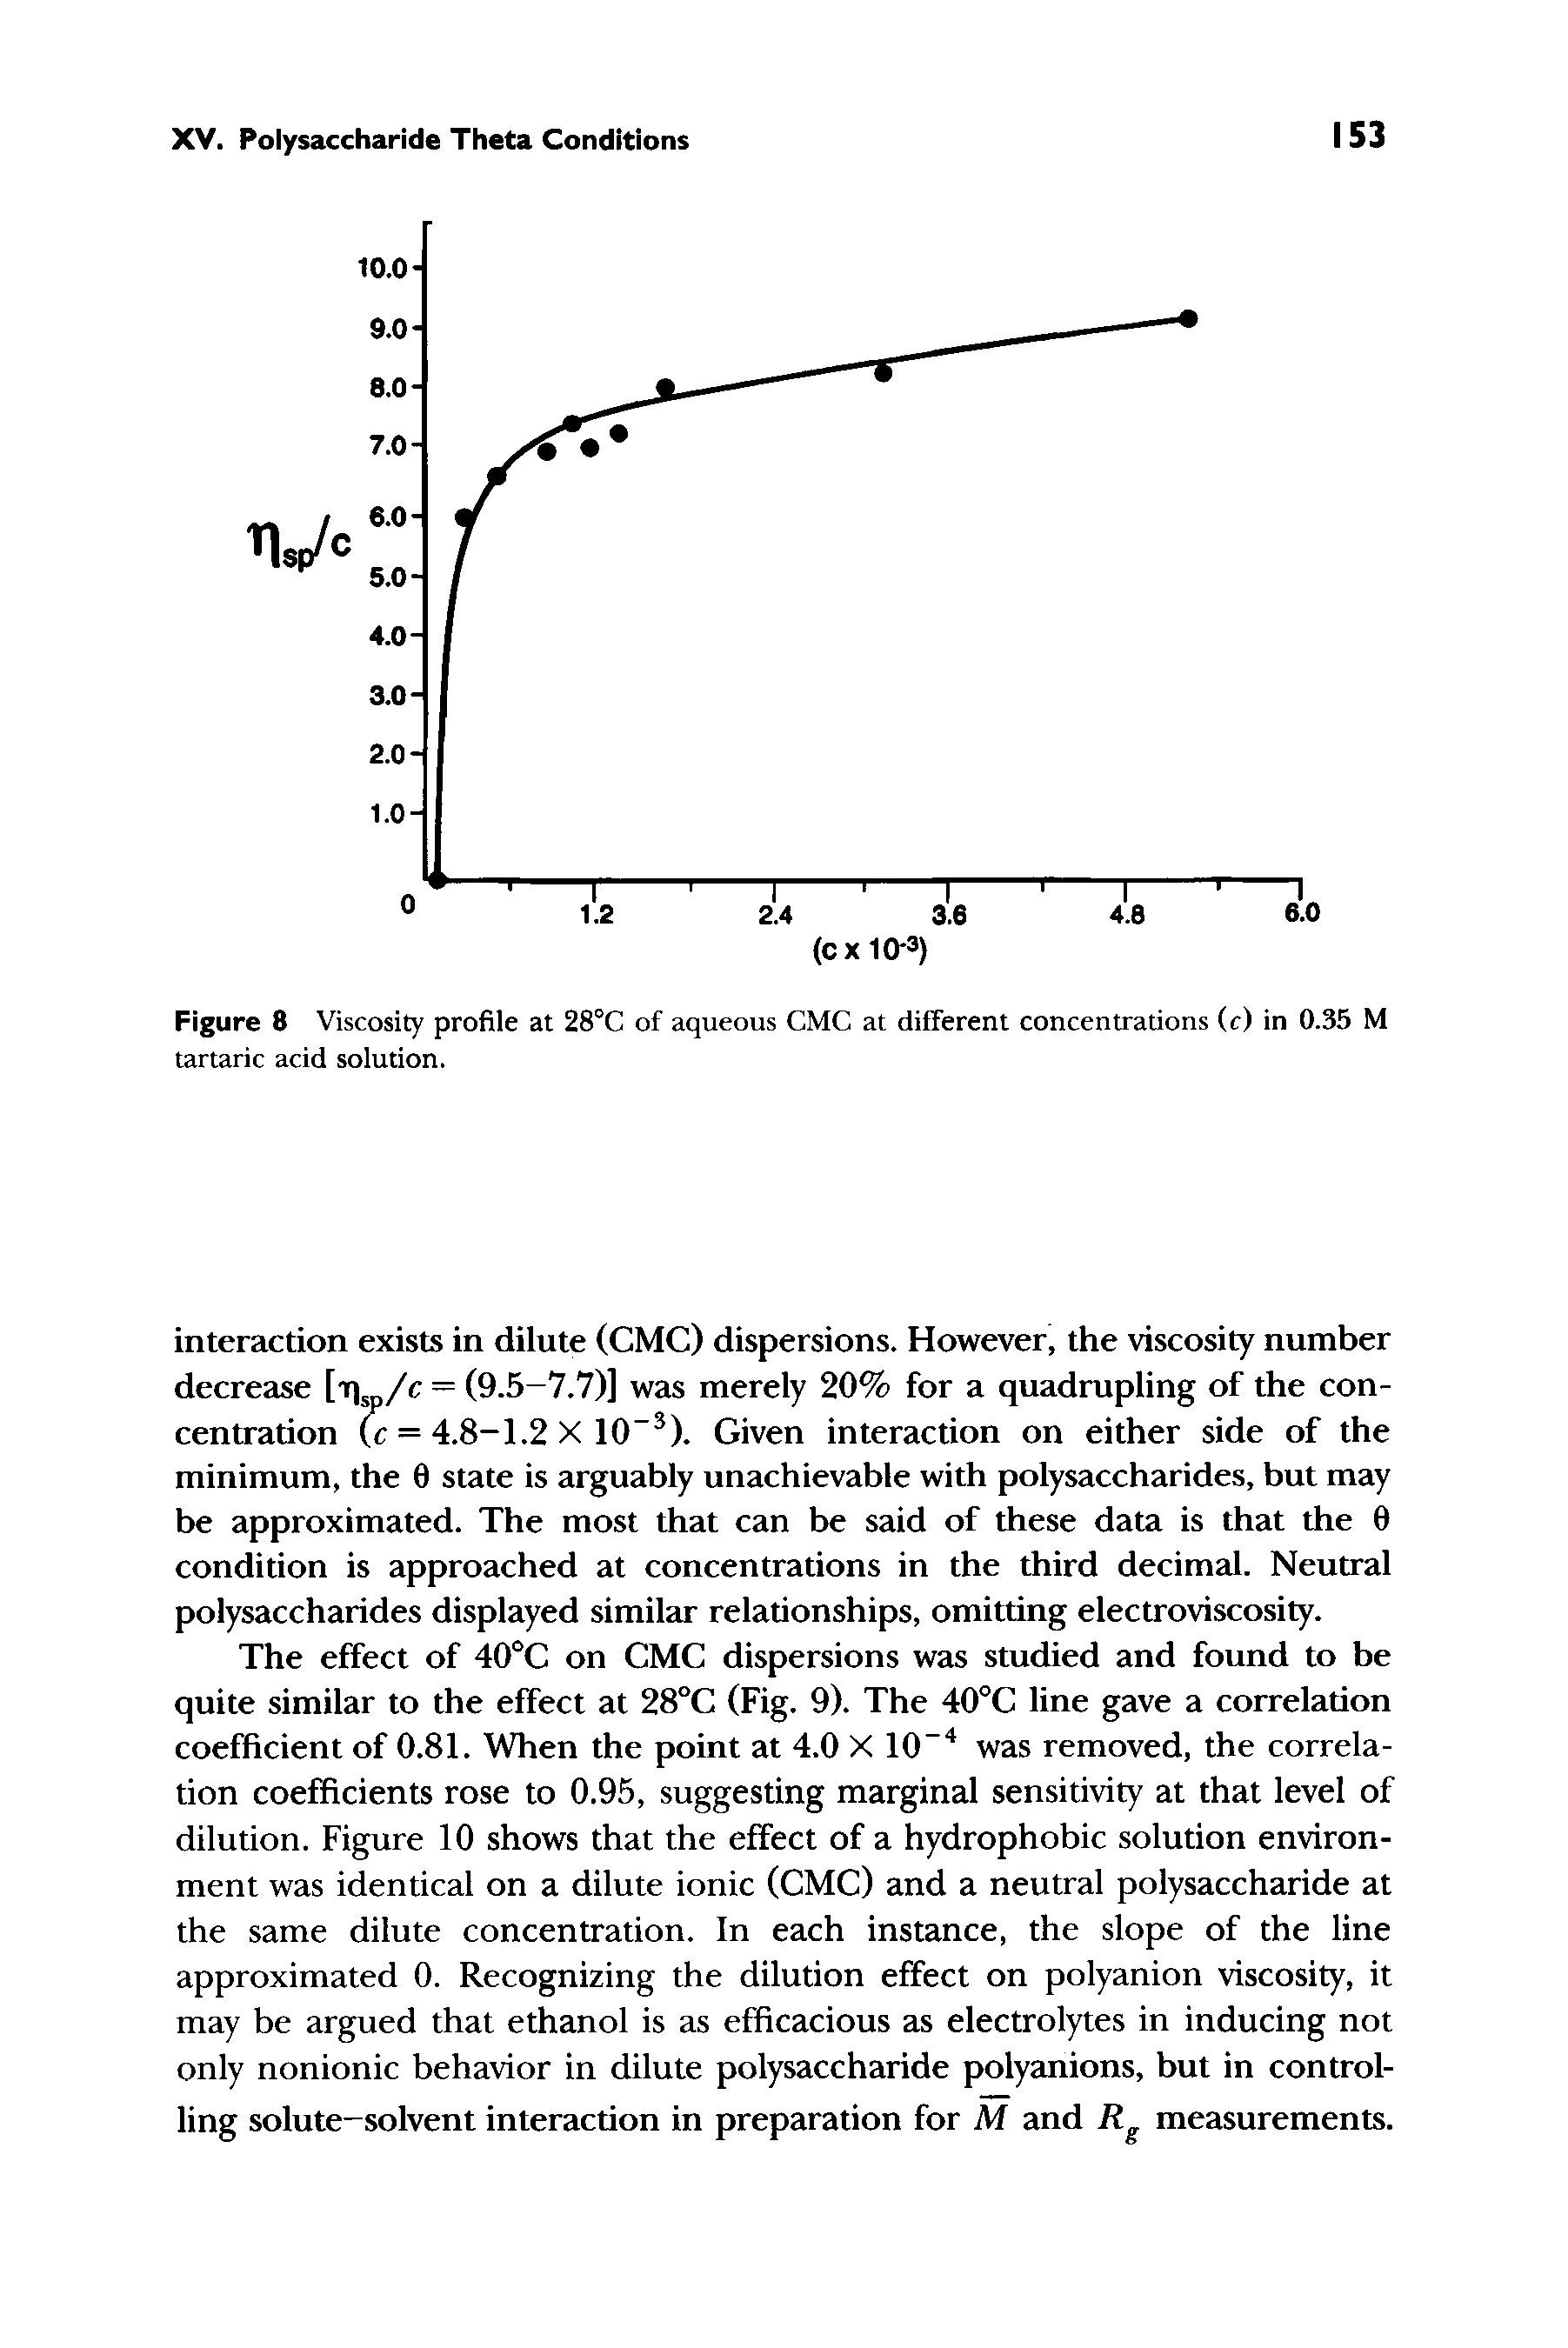 Figure 8 Viscosity profile at 28°C of aqueous CMC at different concentrations (c) in 0.35 M tartaric acid solution.